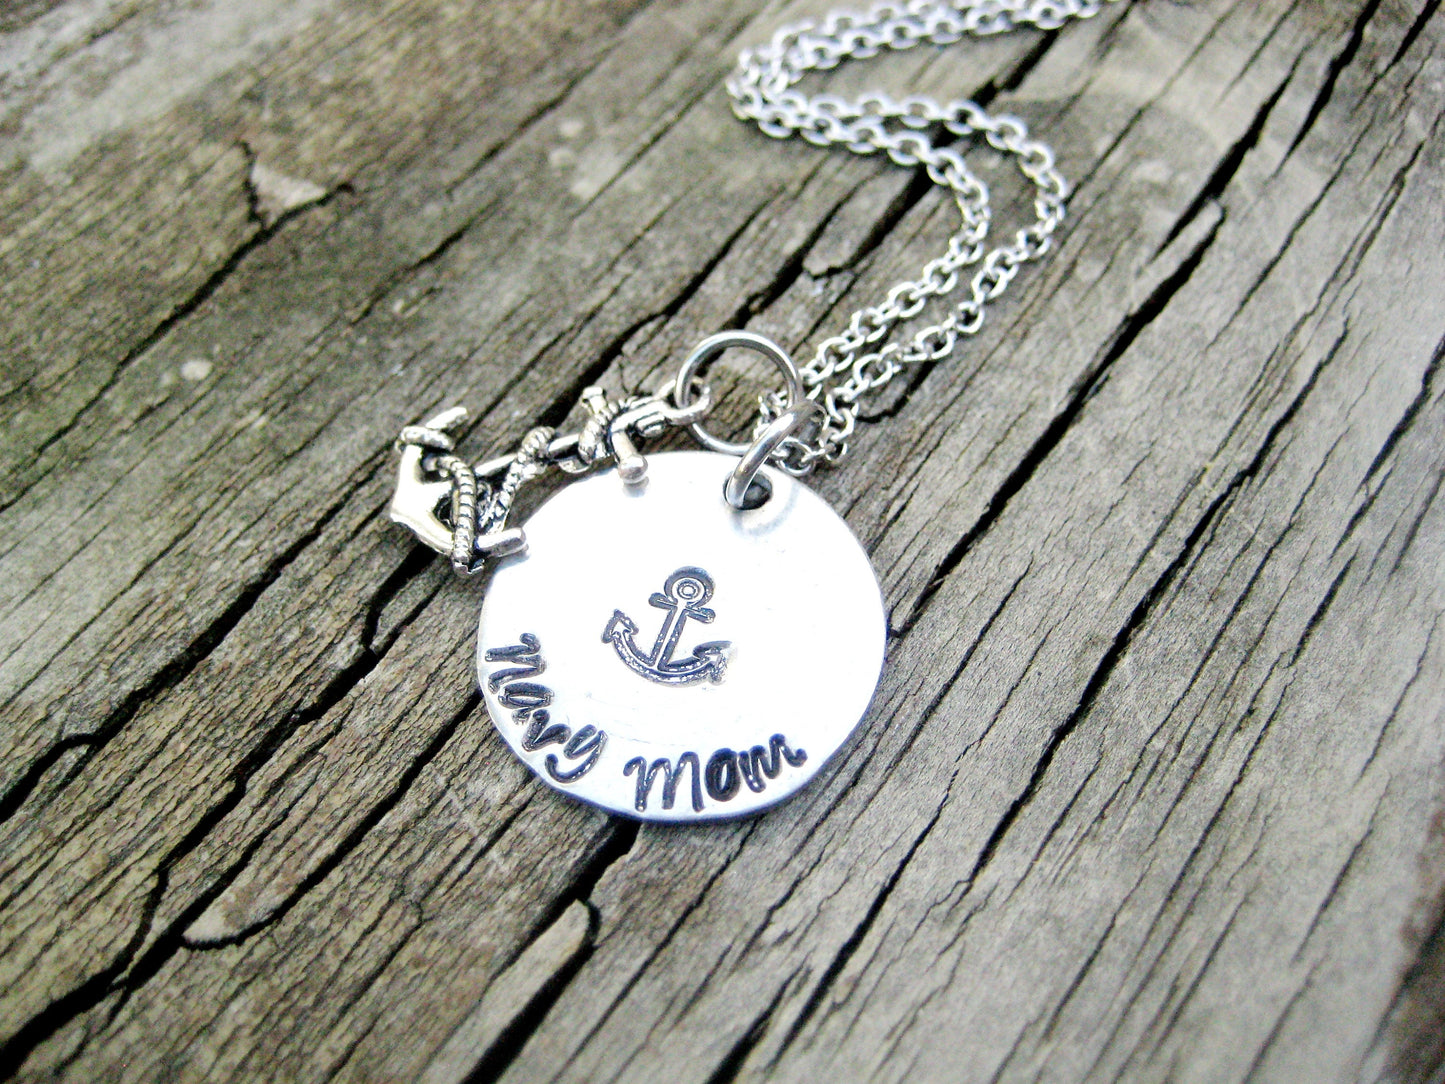 NAVY MOM NECKLACE - Hand Stamped, Navy Mom Necklace, with Anchor Charm, Mother's Day Gift, Gift for Navy Mom, Gift for Mom, Navy Mom Gift